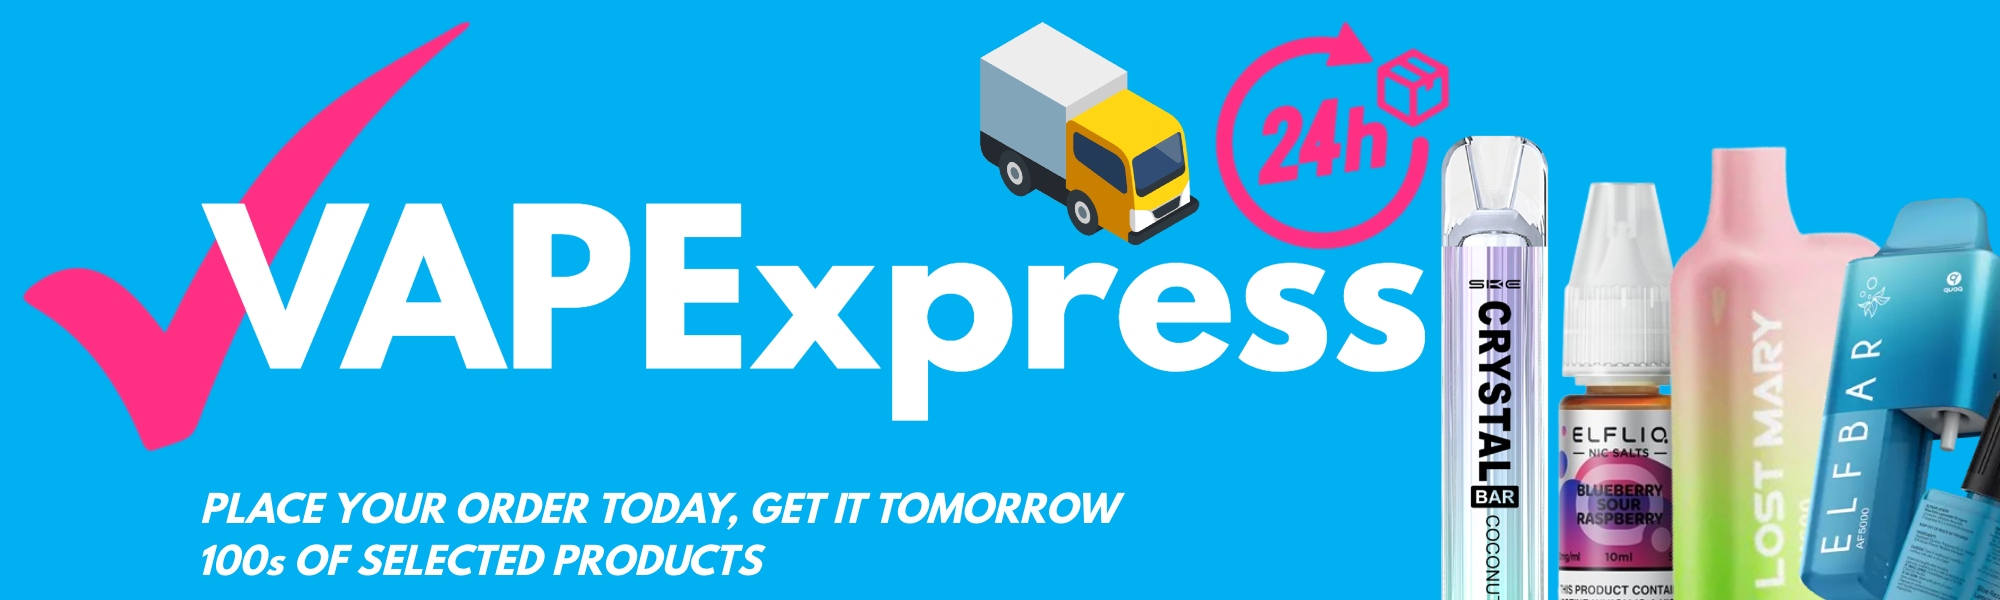 VAPExpress free next day delivery banner (2)